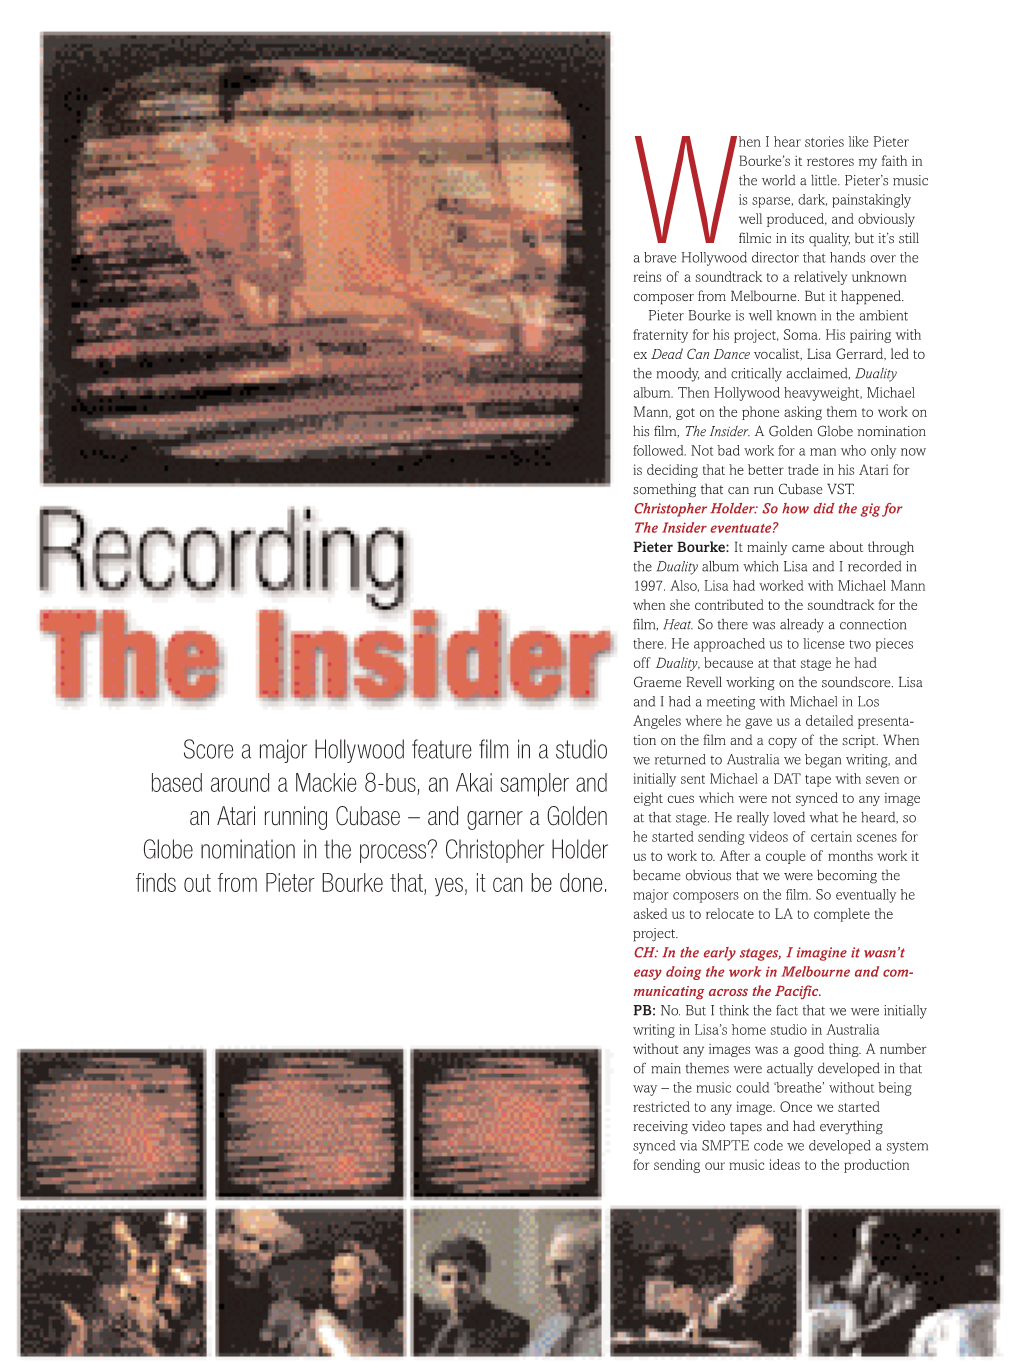 Recording the Insider Issue 10